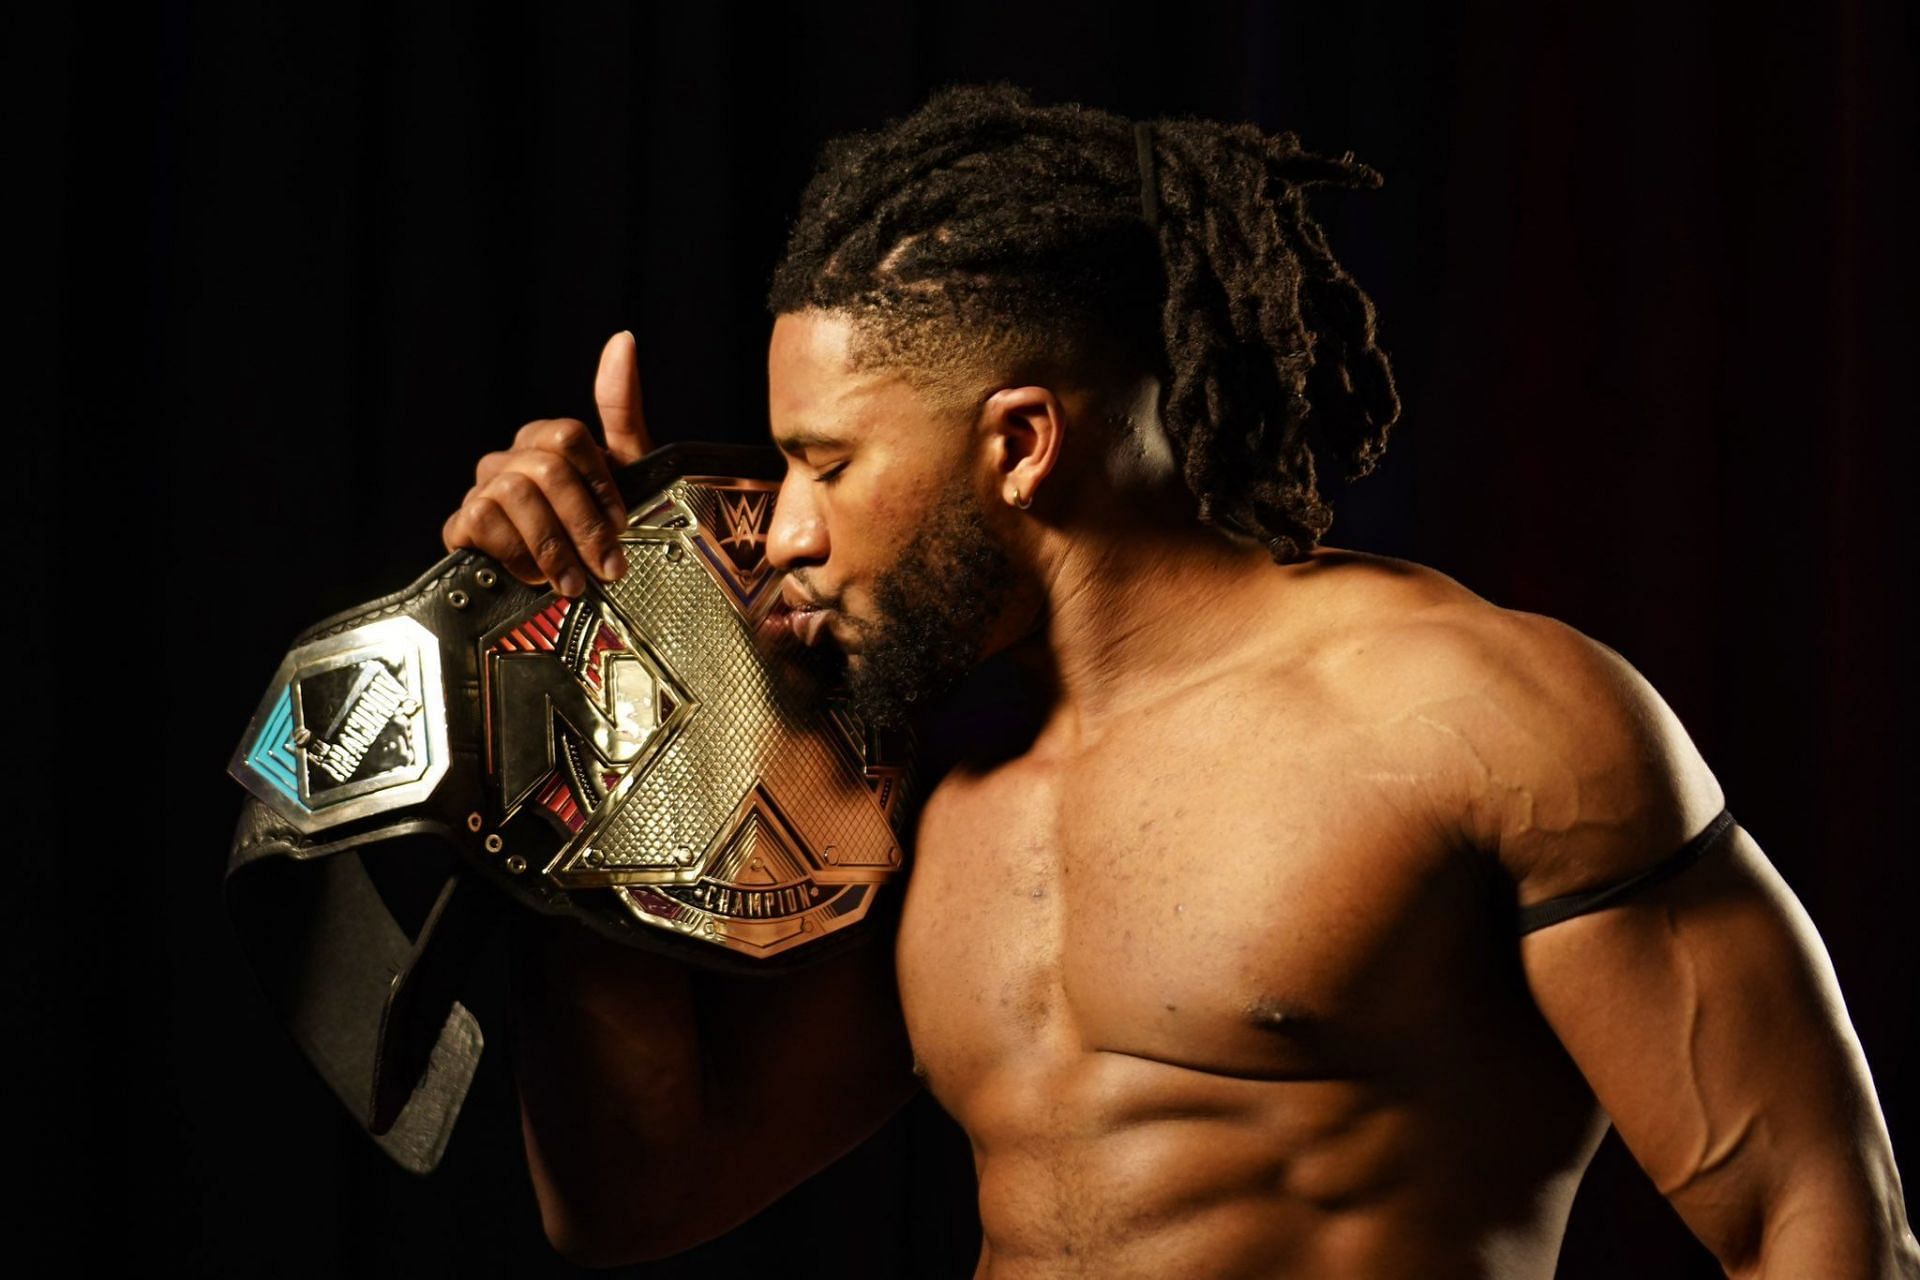 Trick Williams is the new NXT champion.